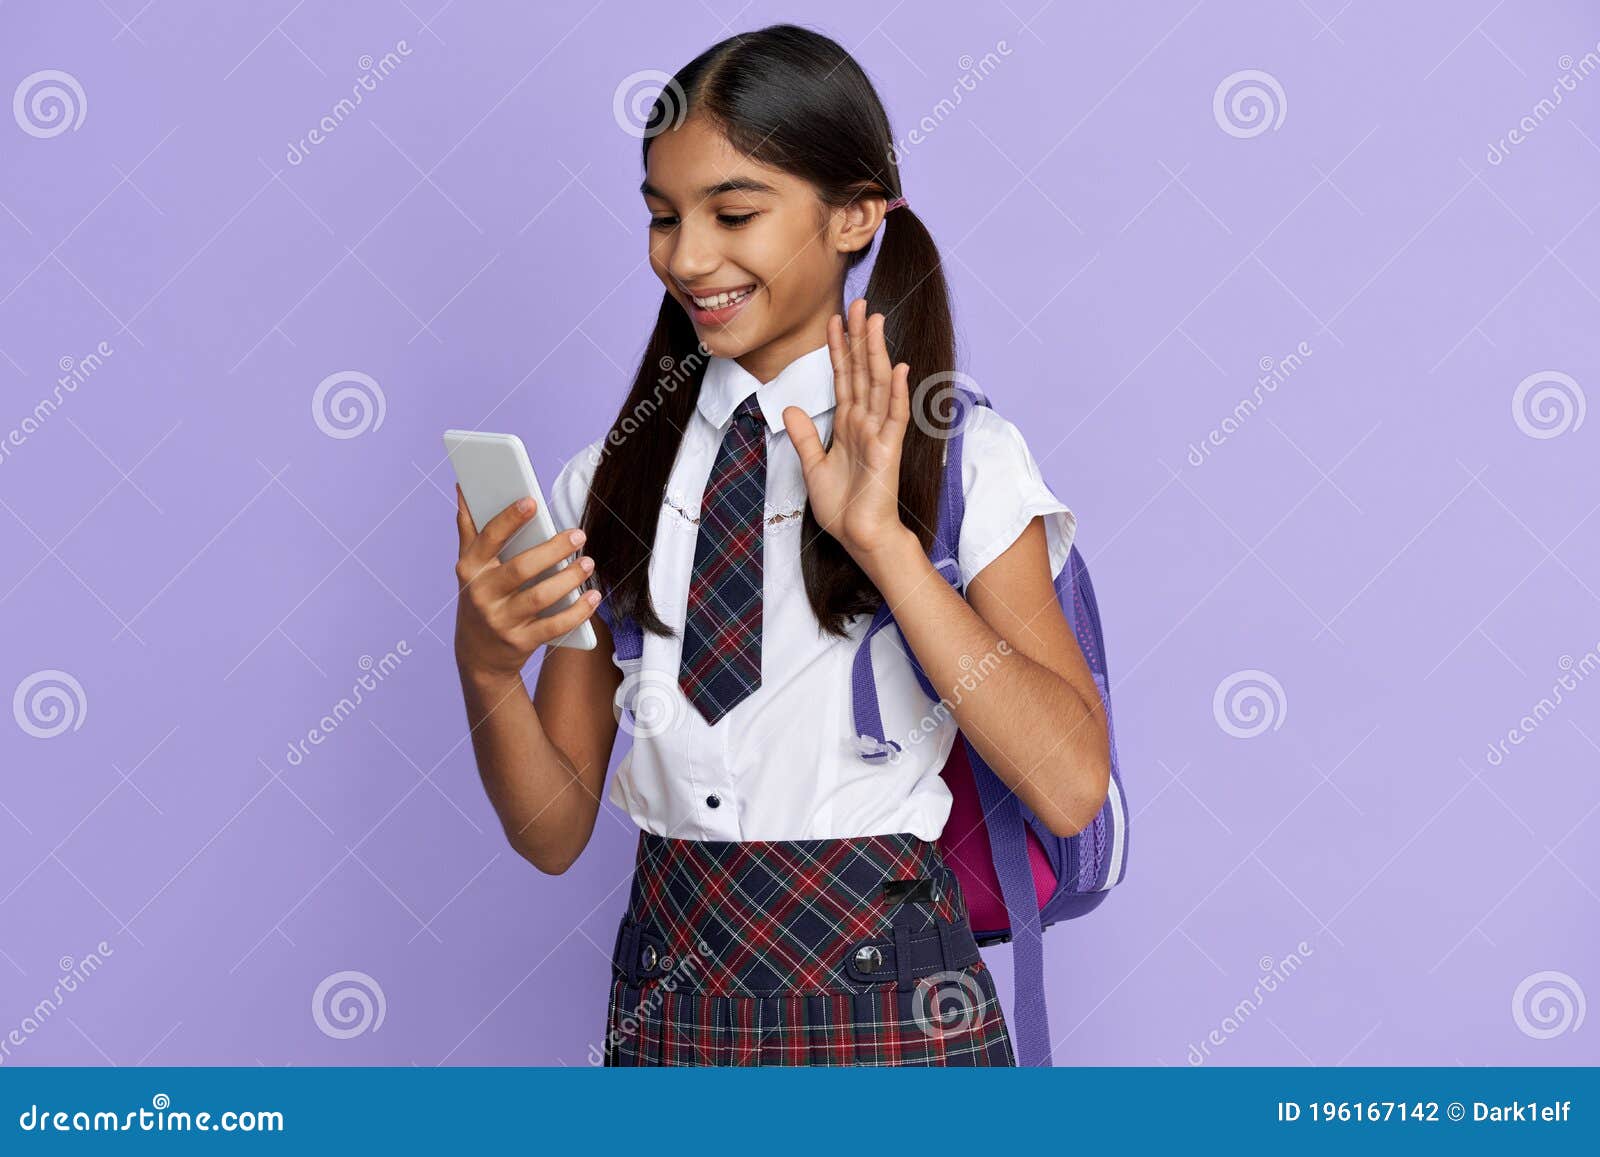 Smiling Indian School Girl Video Calling on Mobile Phone Isolated on  Background. Stock Photo - Image of learn, cellphone: 196167142